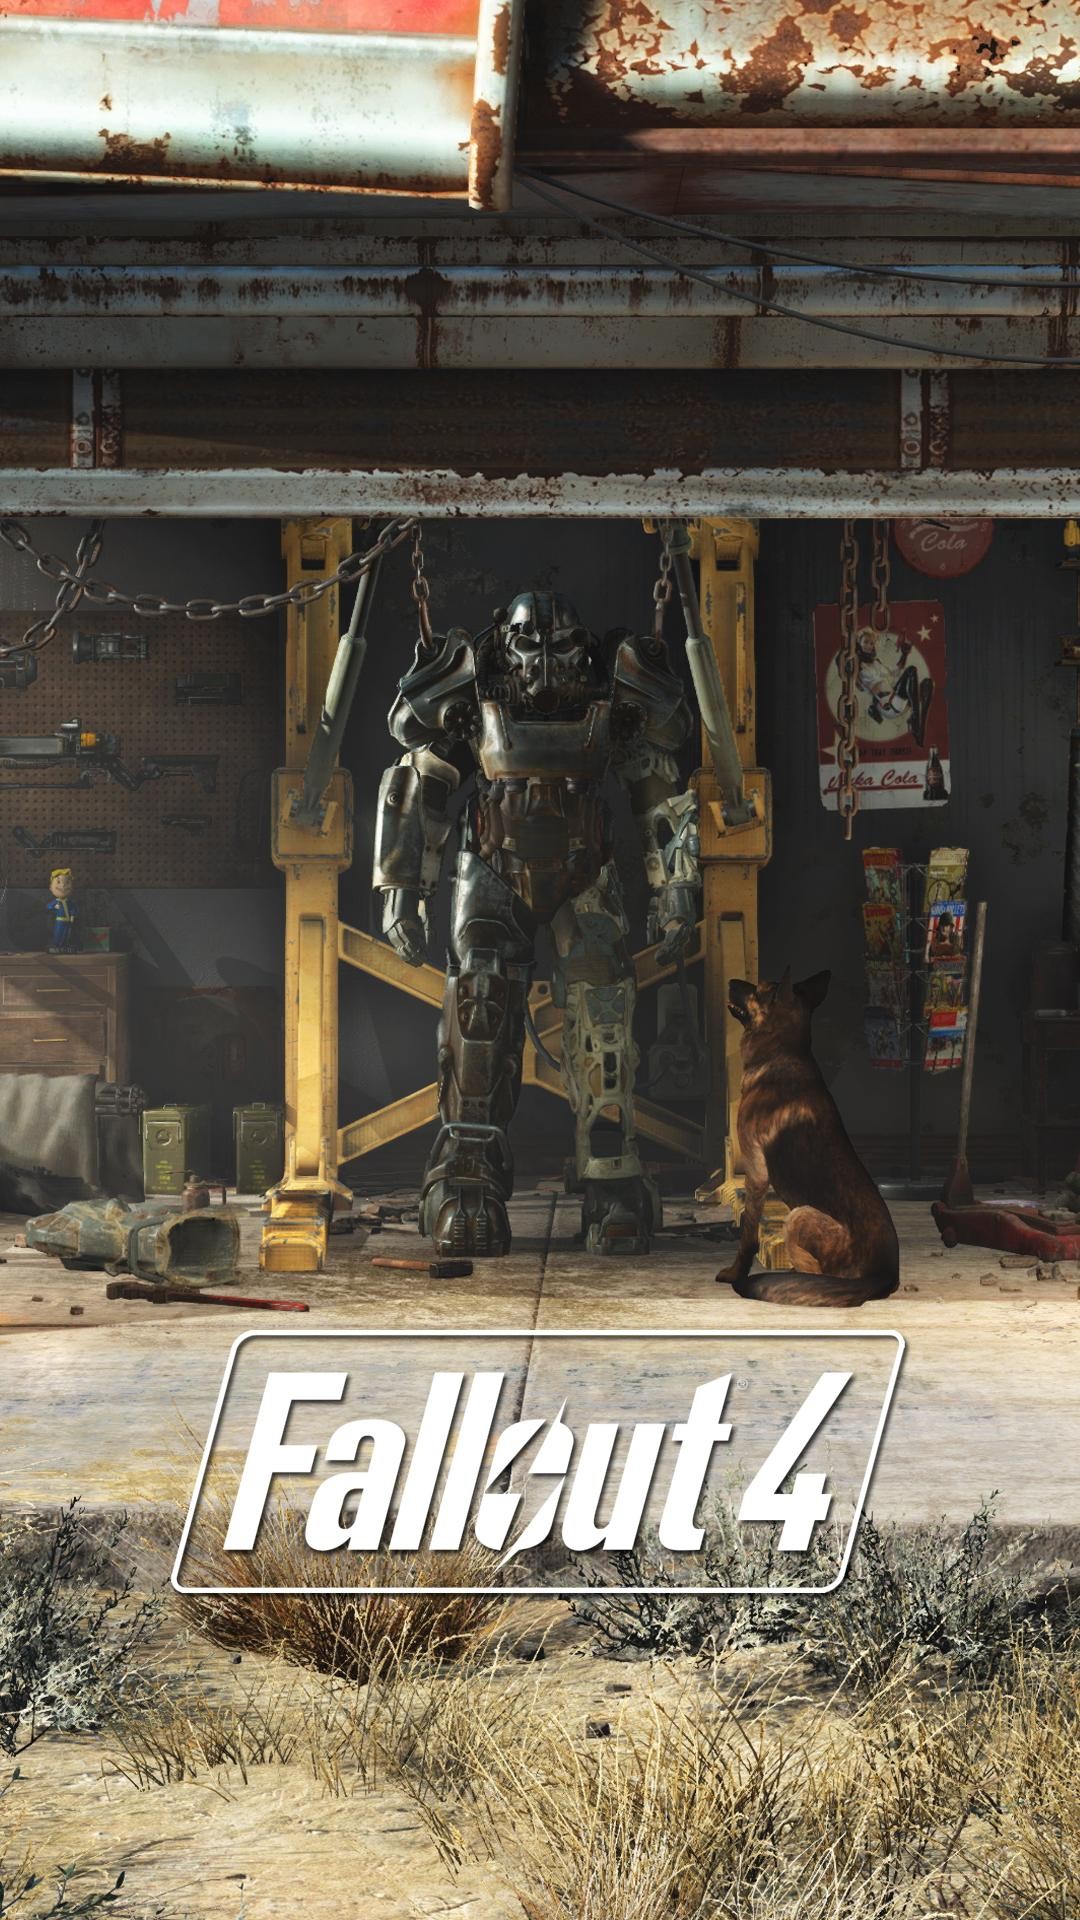 1080x1920 I made some Fallout 4 lock screen wallpapers from stills